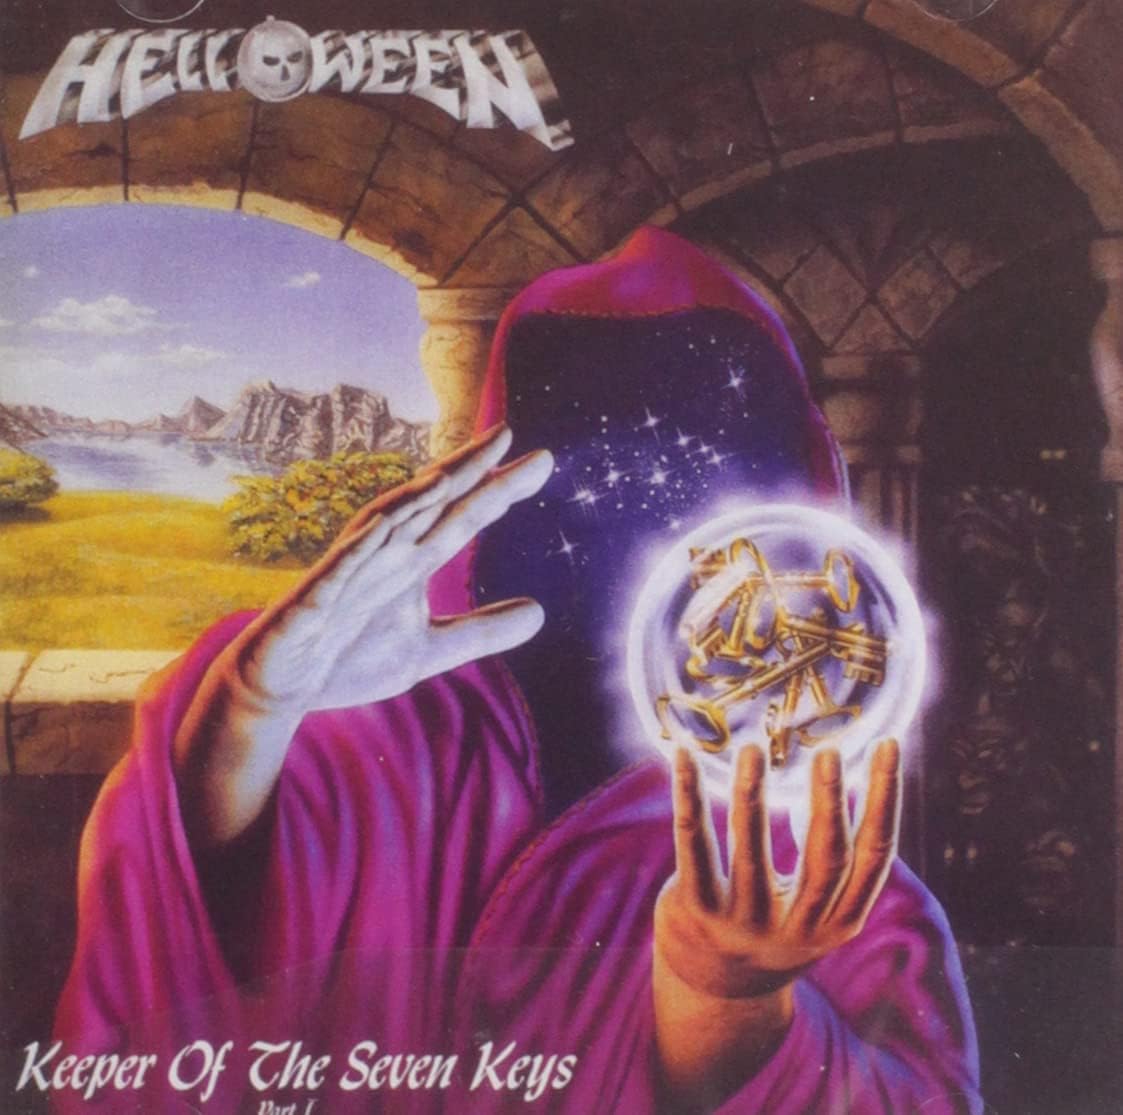 Keepers of the Seven Keys PT. 1 [Audio CD] Helloween